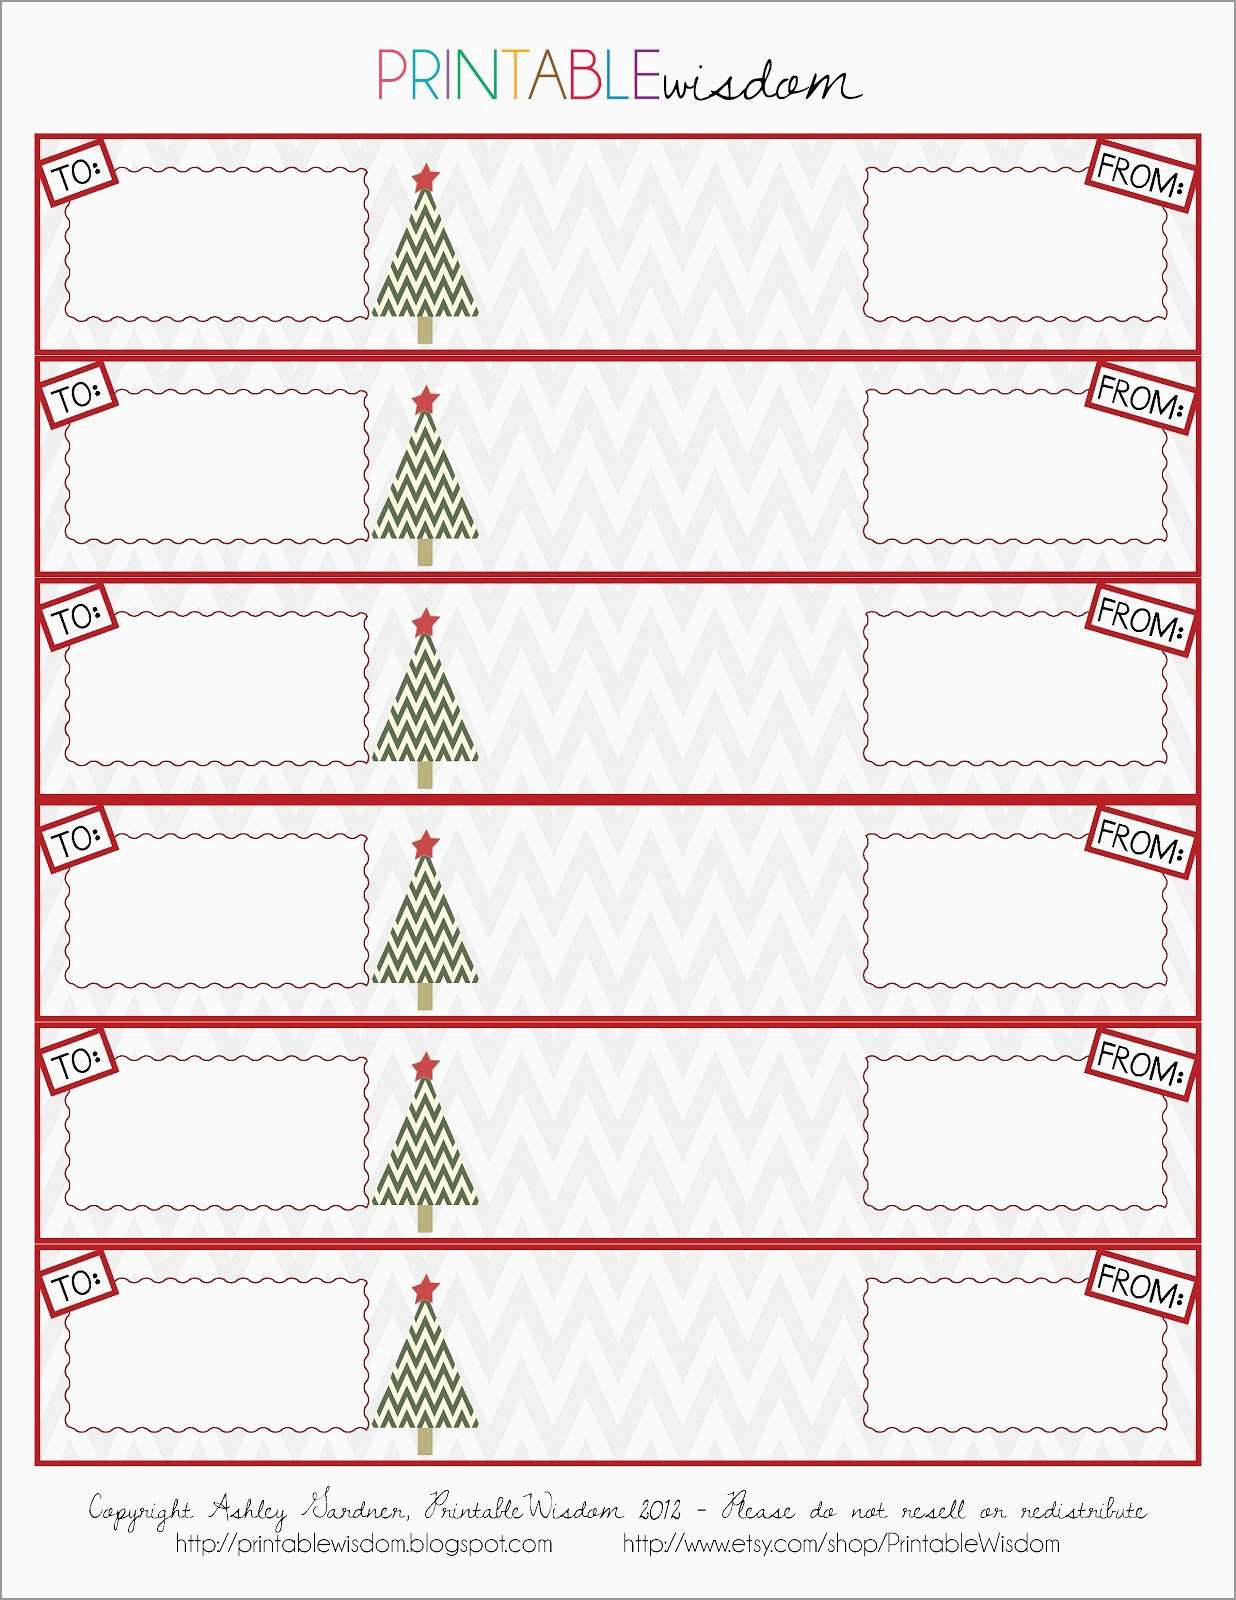 Awesome Free Holiday Return Address Label Template | Best Of Template - Free Printable Christmas Return Address Label Template